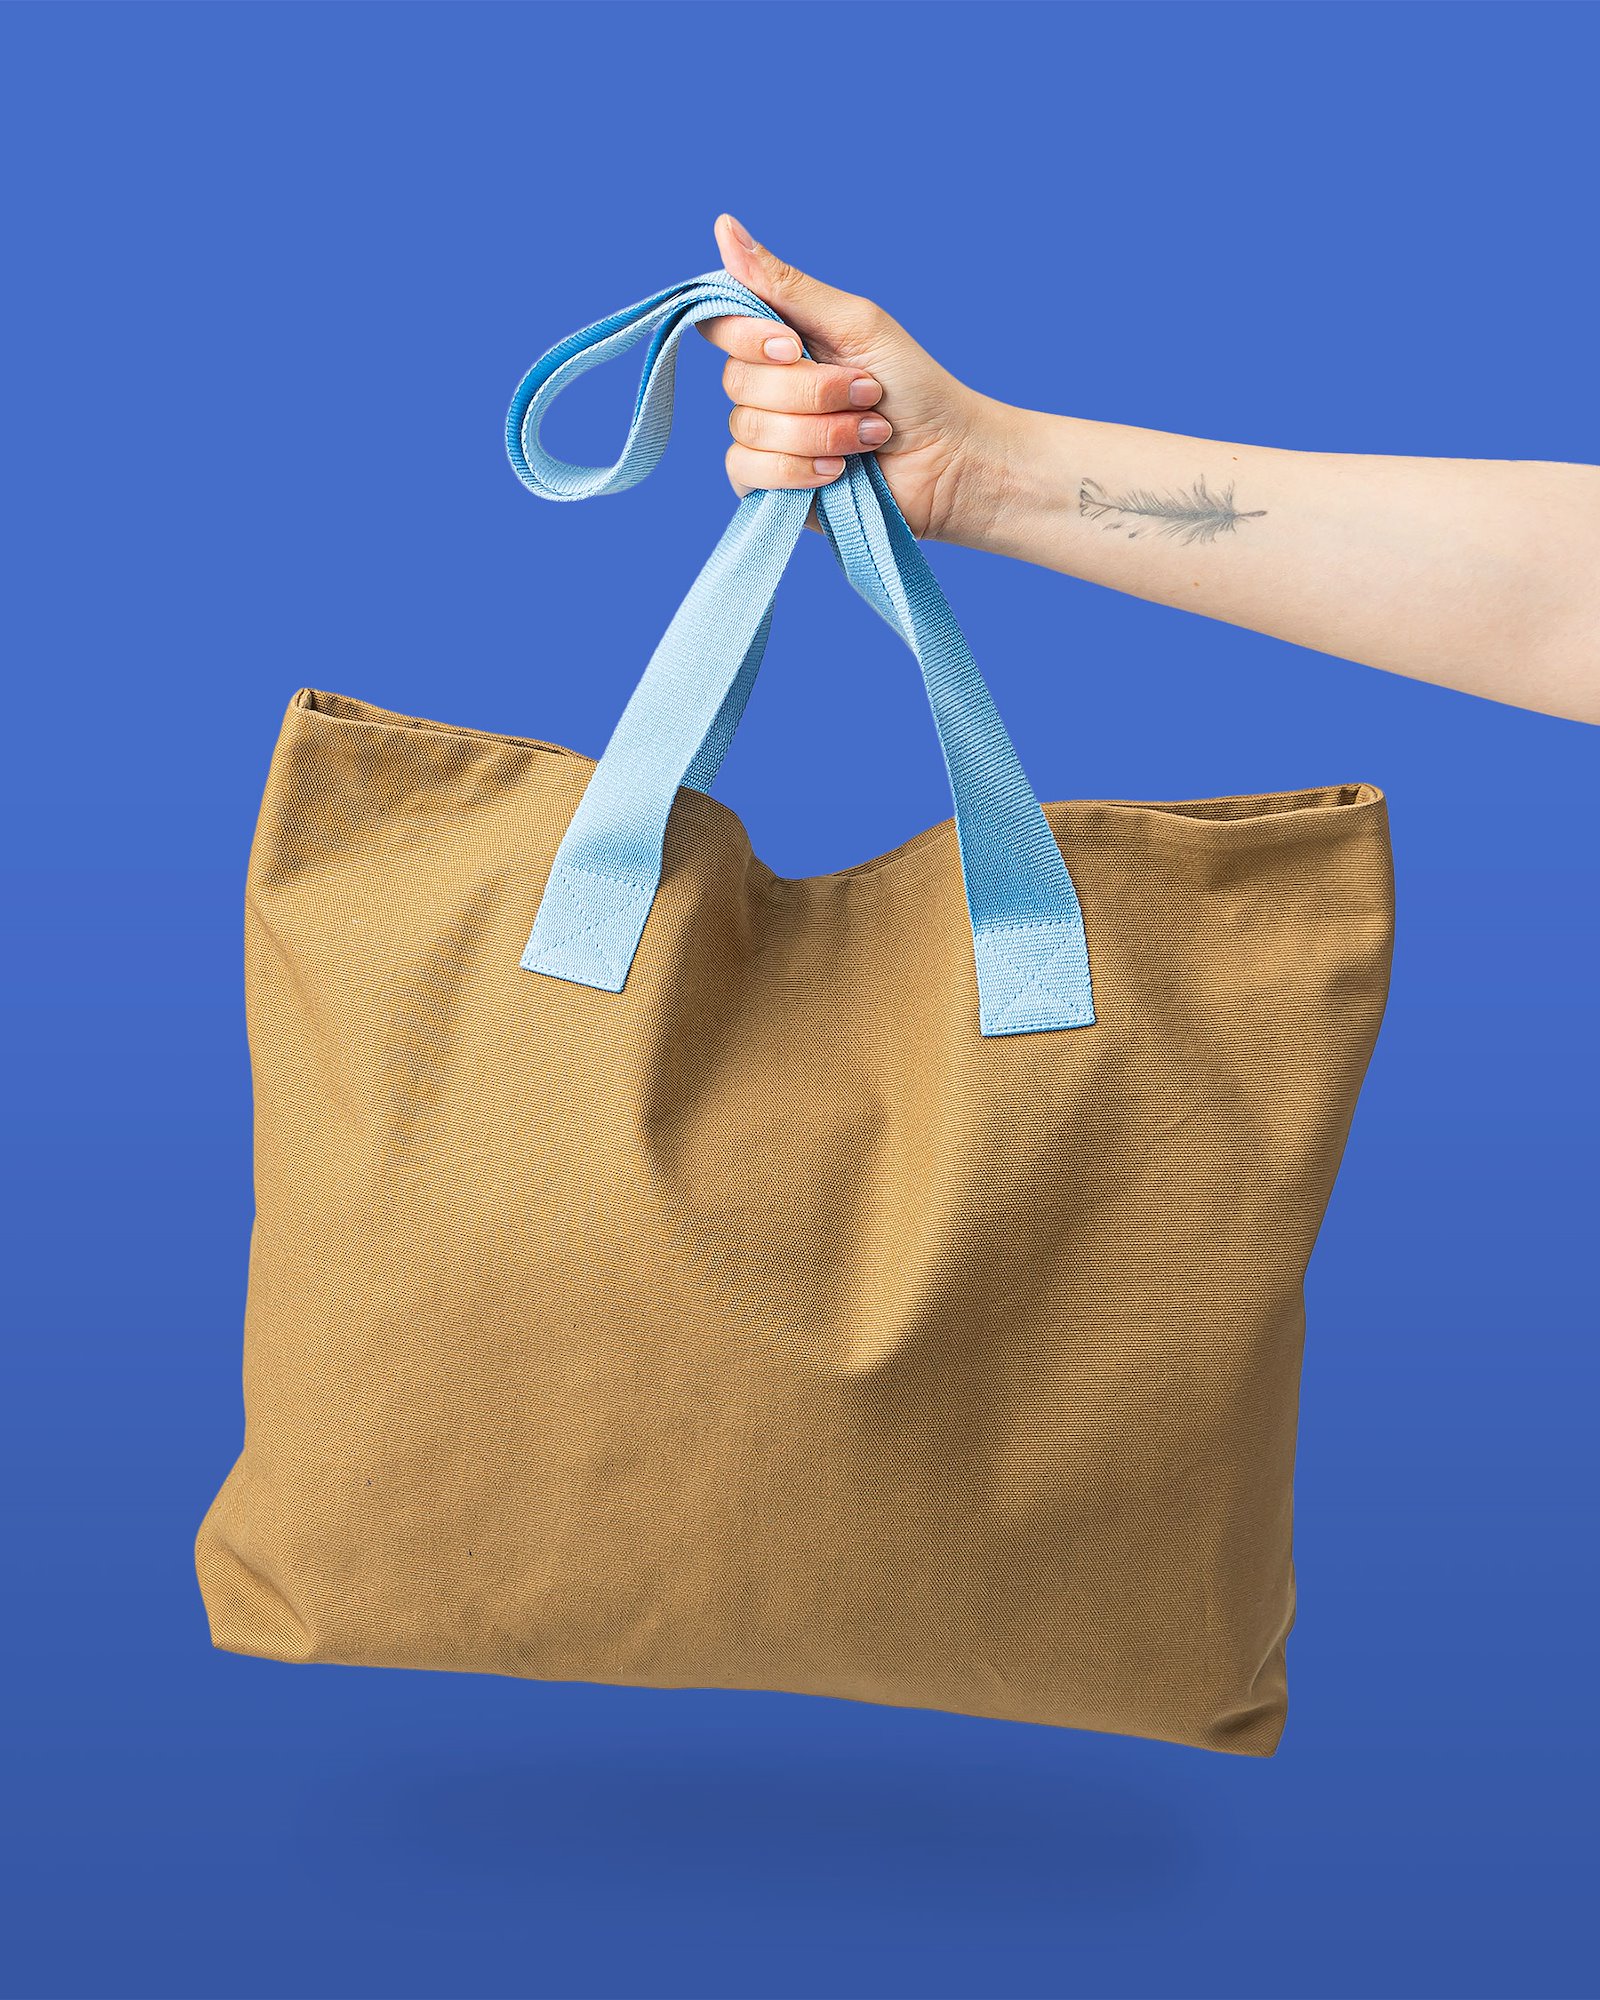 Free sewing pattern: Bag with strap and magnetic lock DIY7001_image.jpg